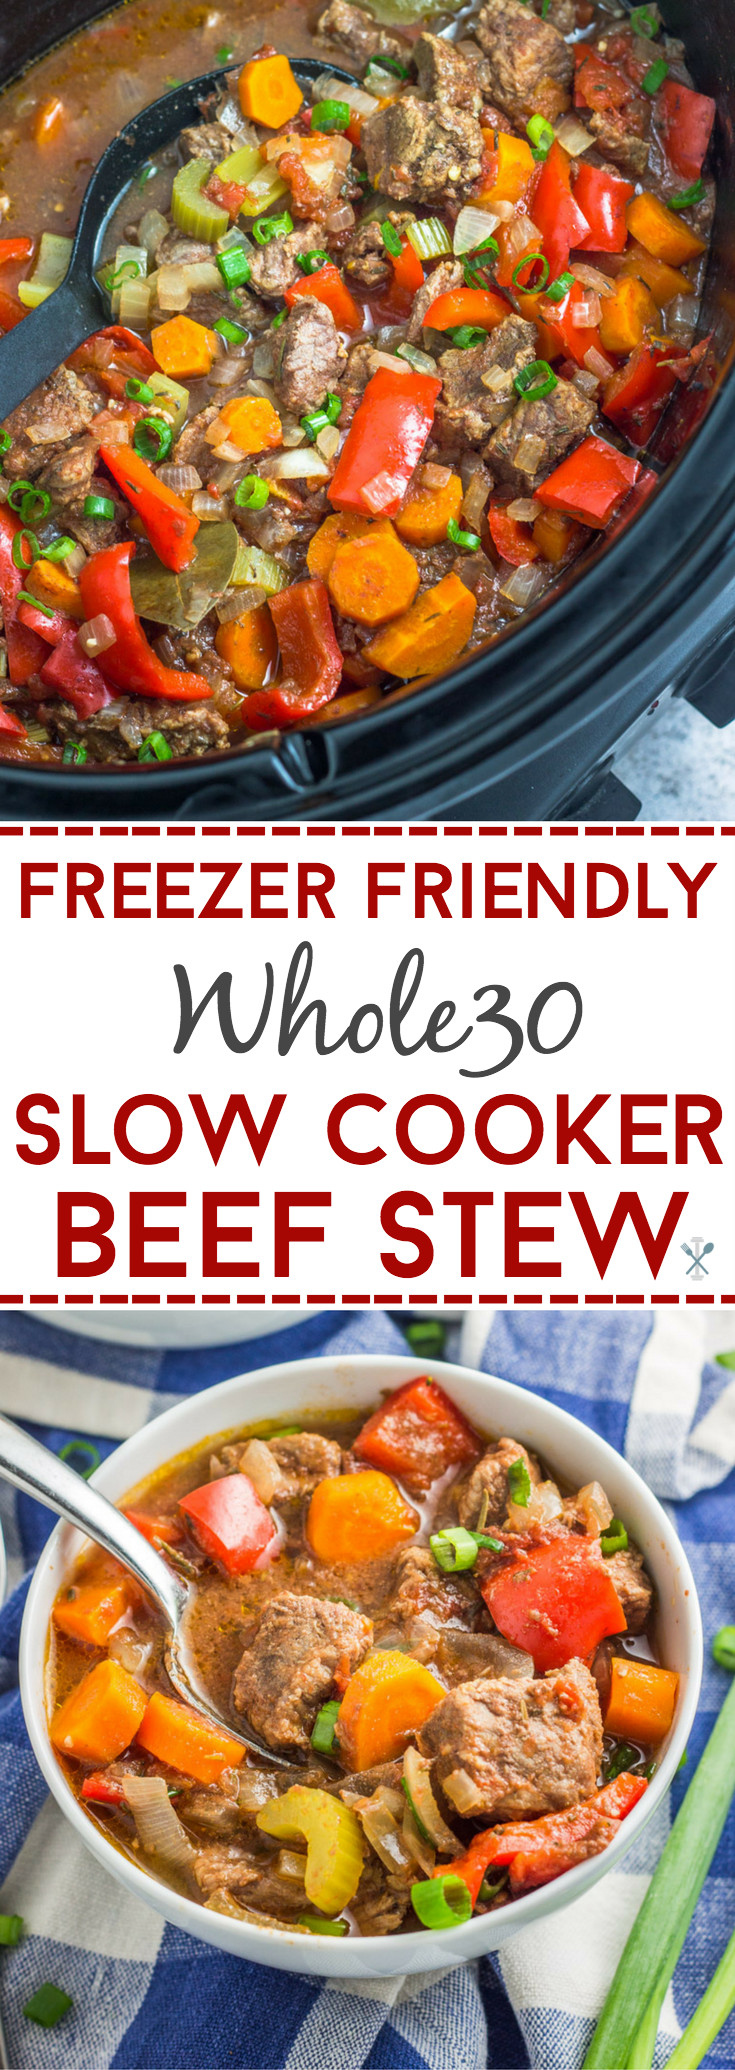 Whole30 Beef Stew
 Freezer Friendly Whole30 Slow Cooker Beef Stew